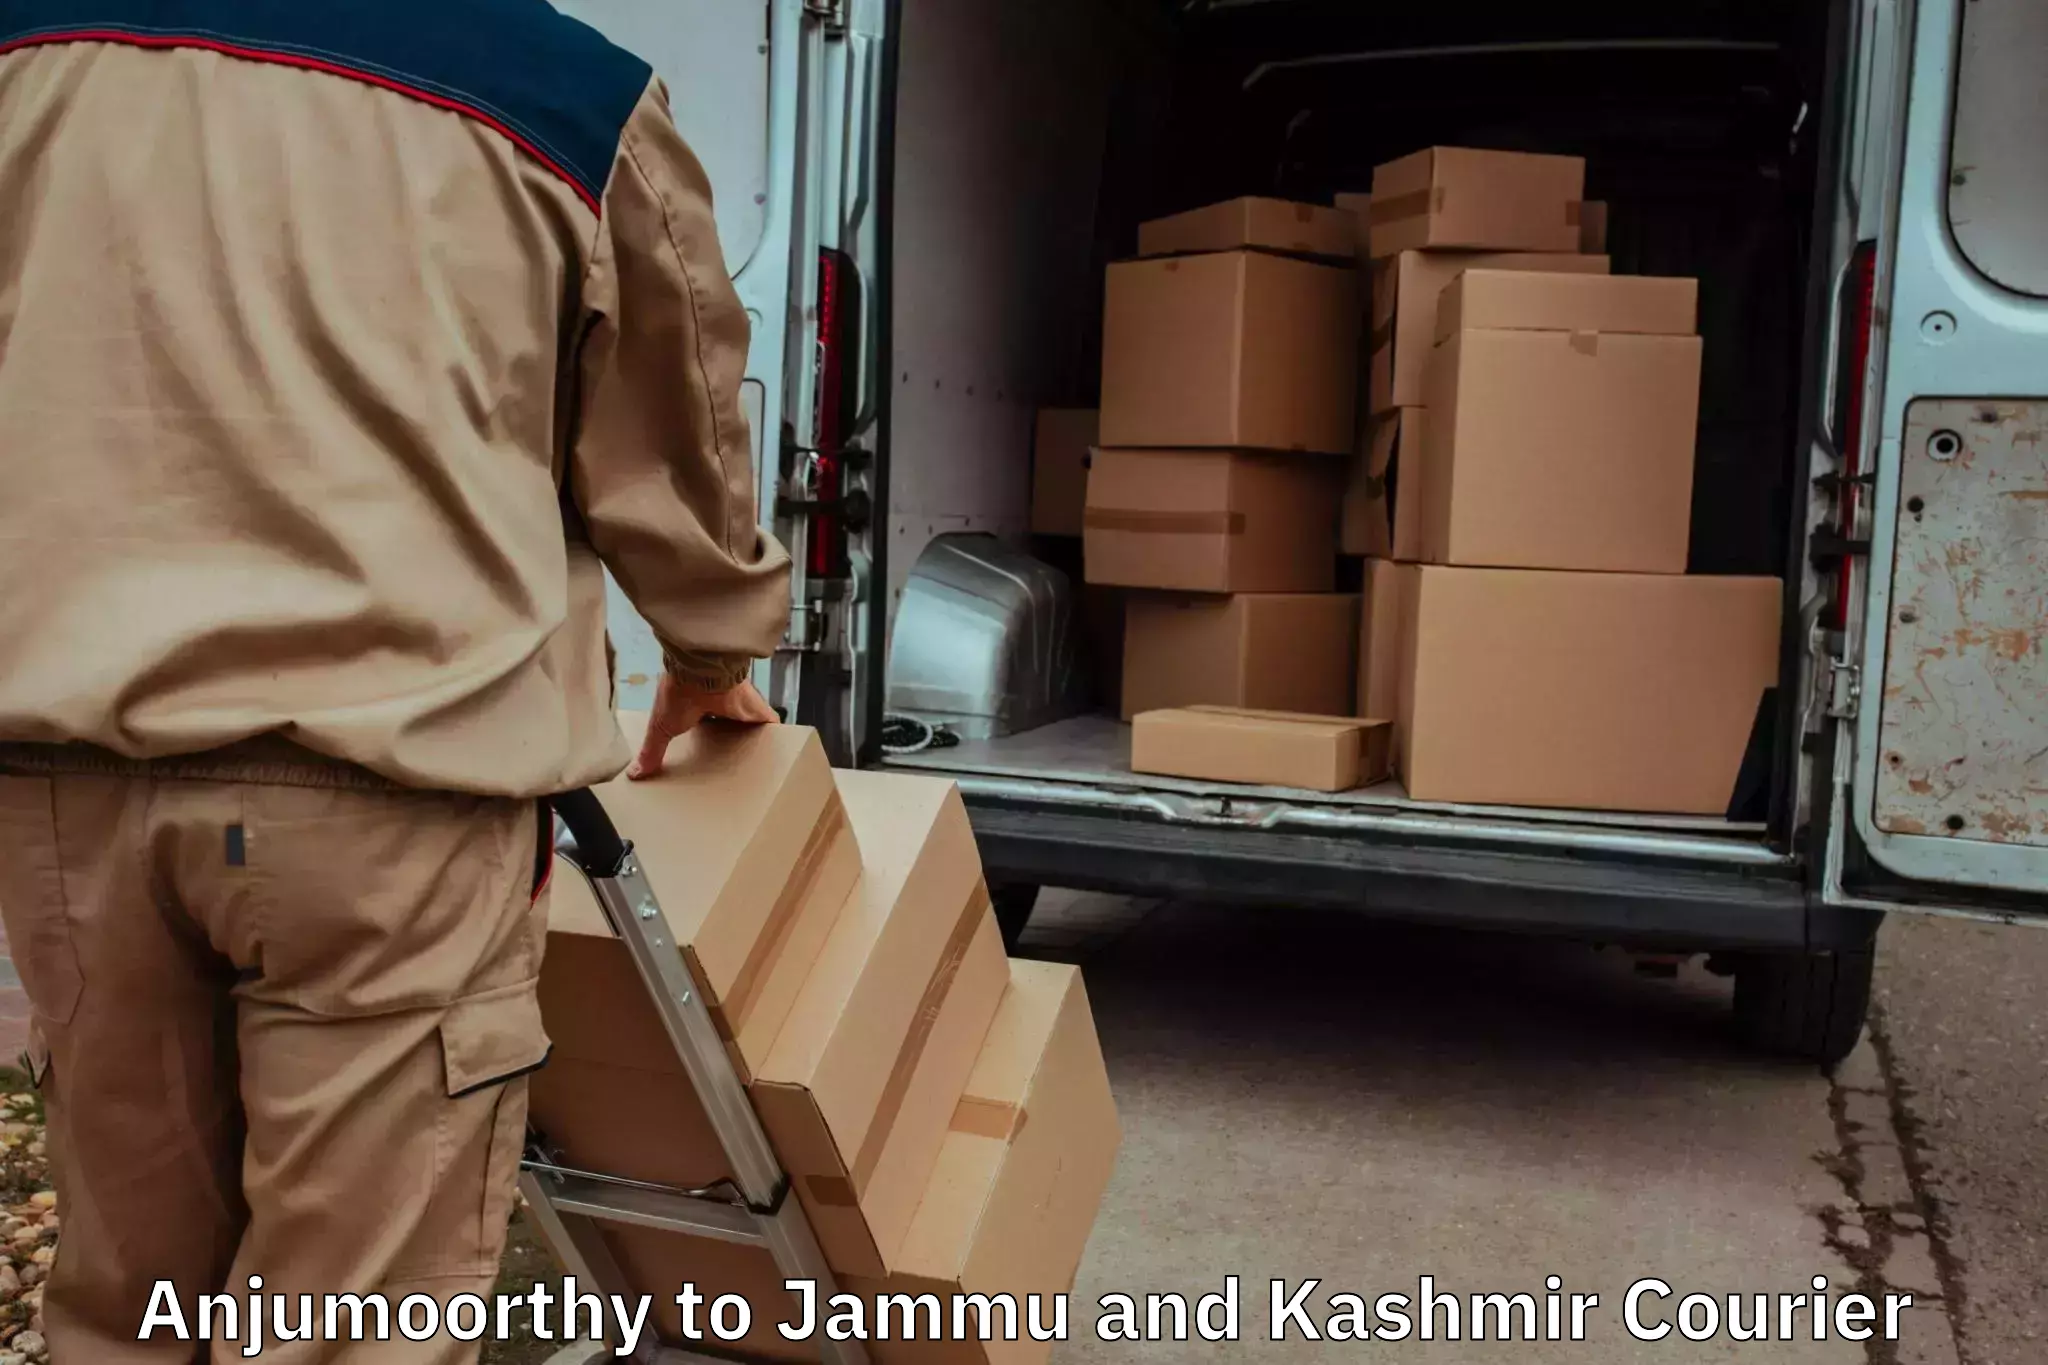 Efficient packing and moving in Anjumoorthy to Shopian